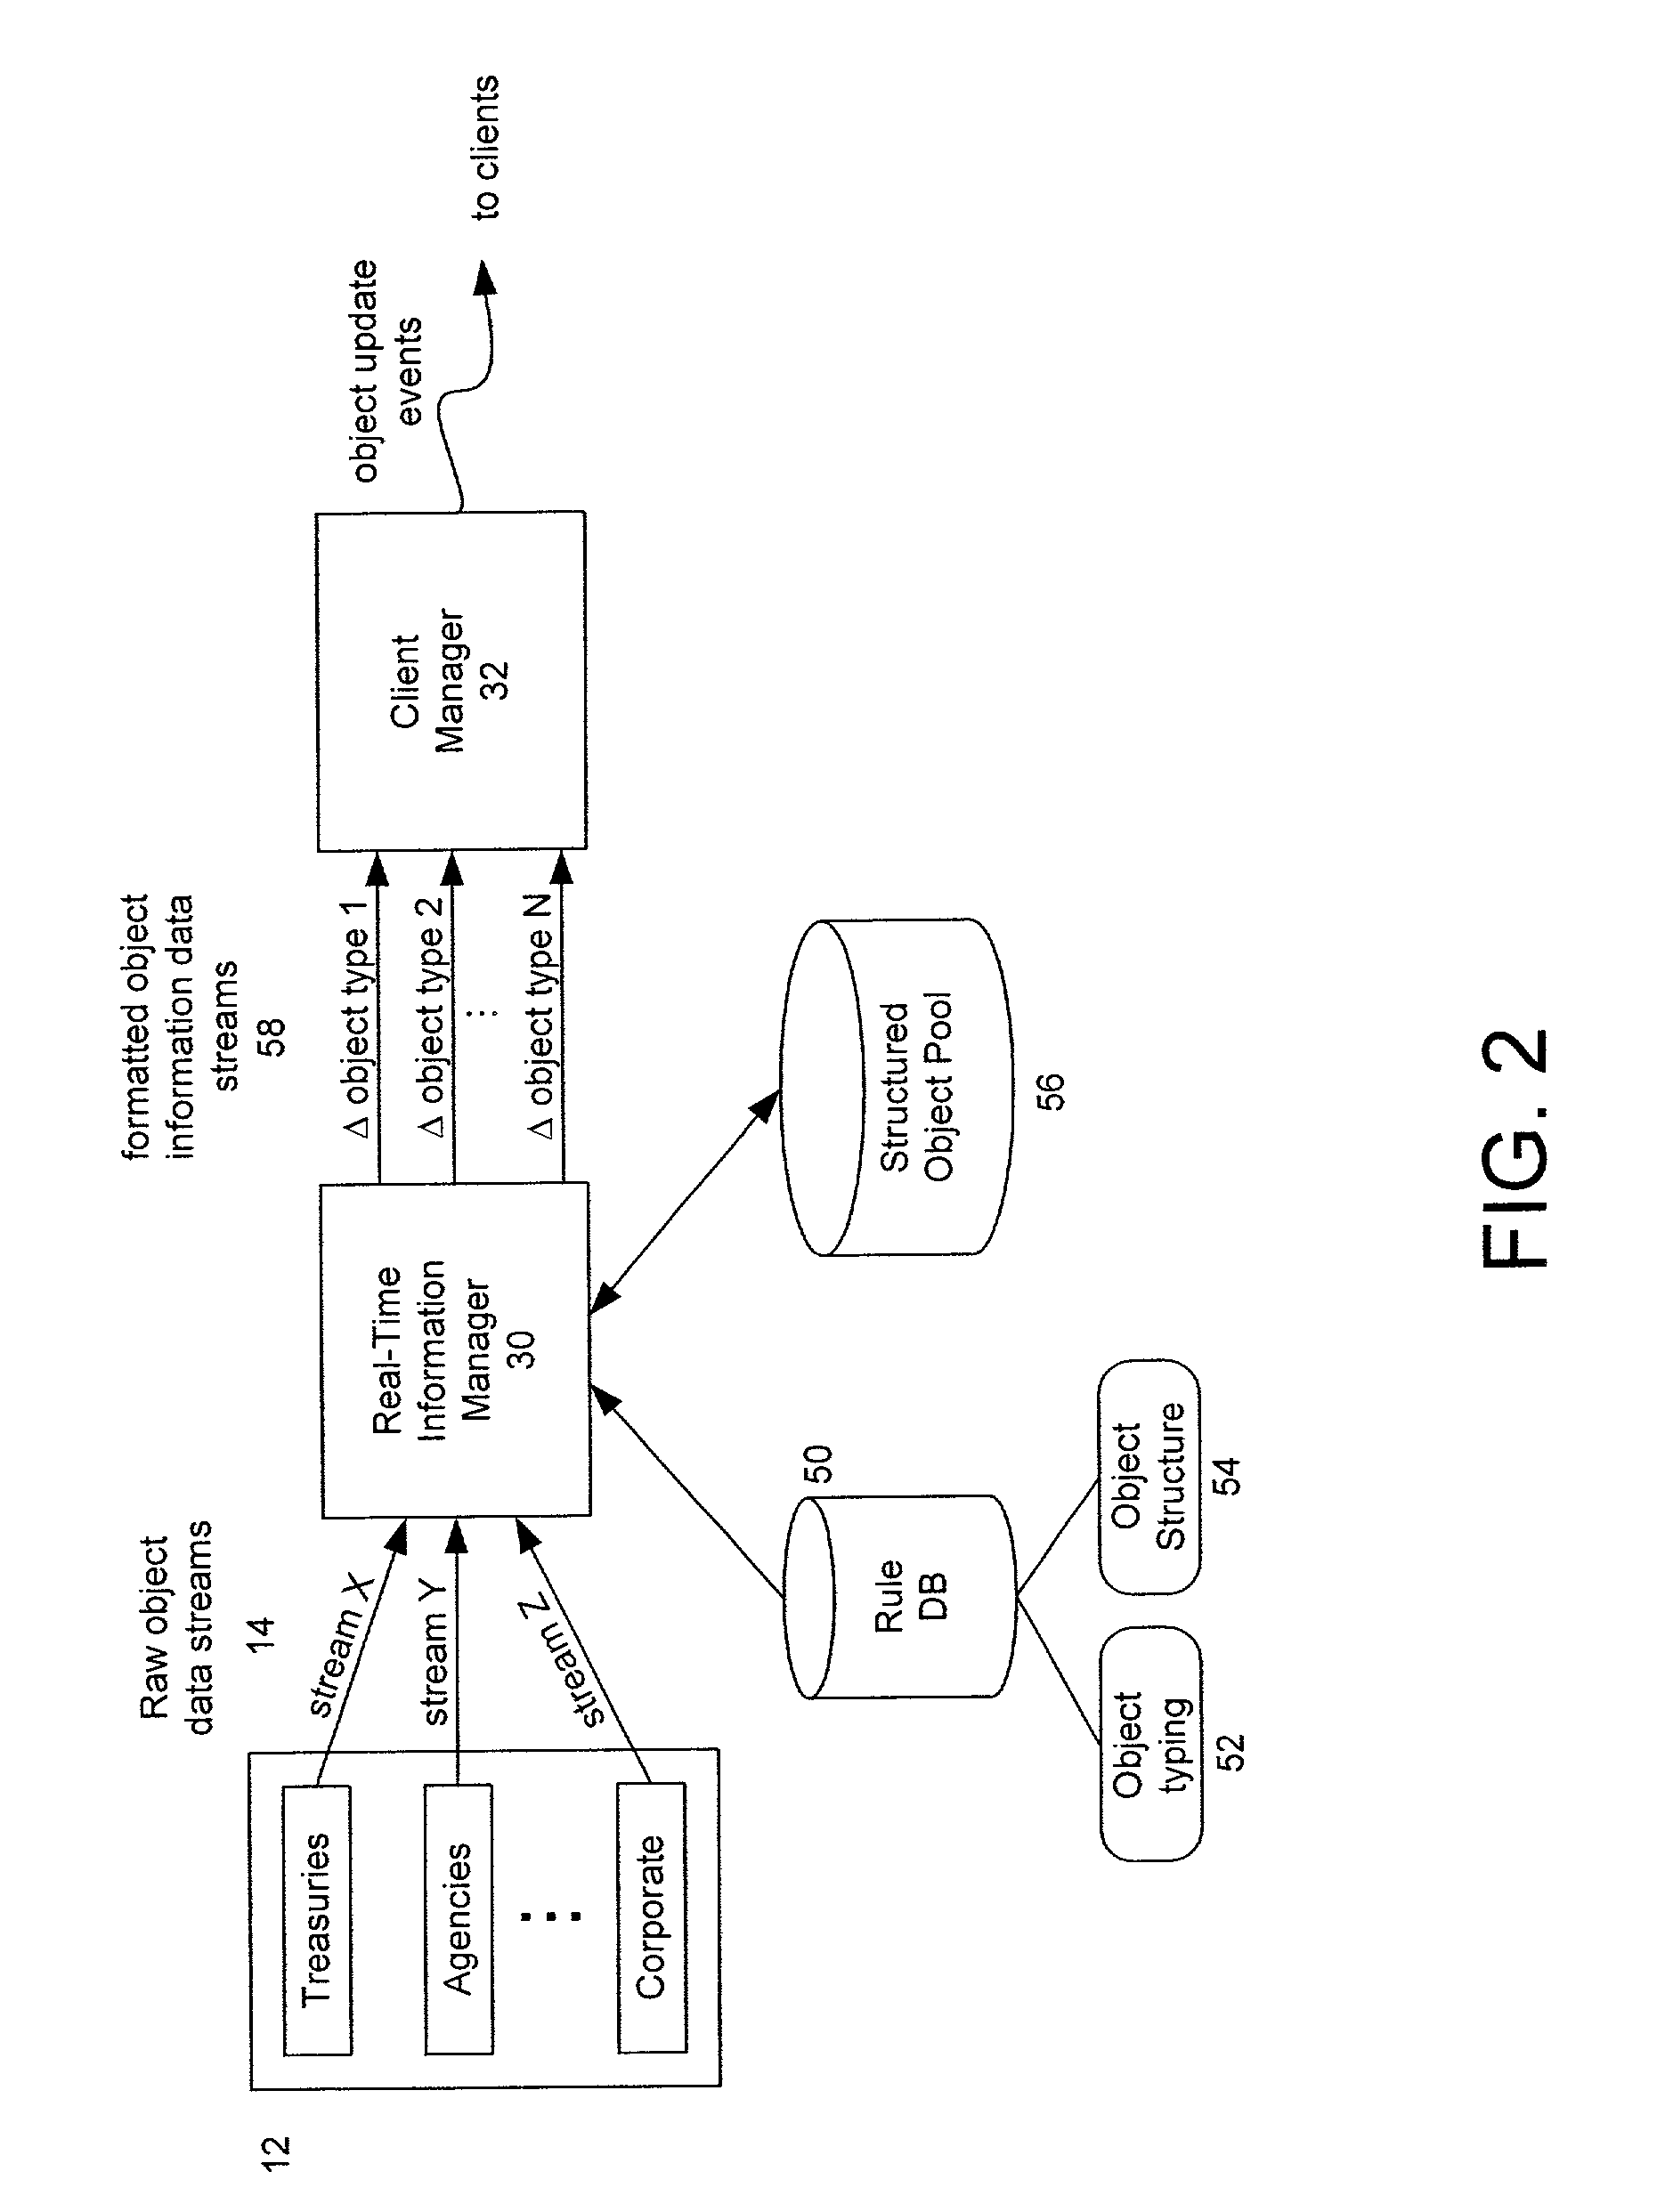 Method and system for processing financial data objects carried on broadcast data streams and delivering information to subscribing clients